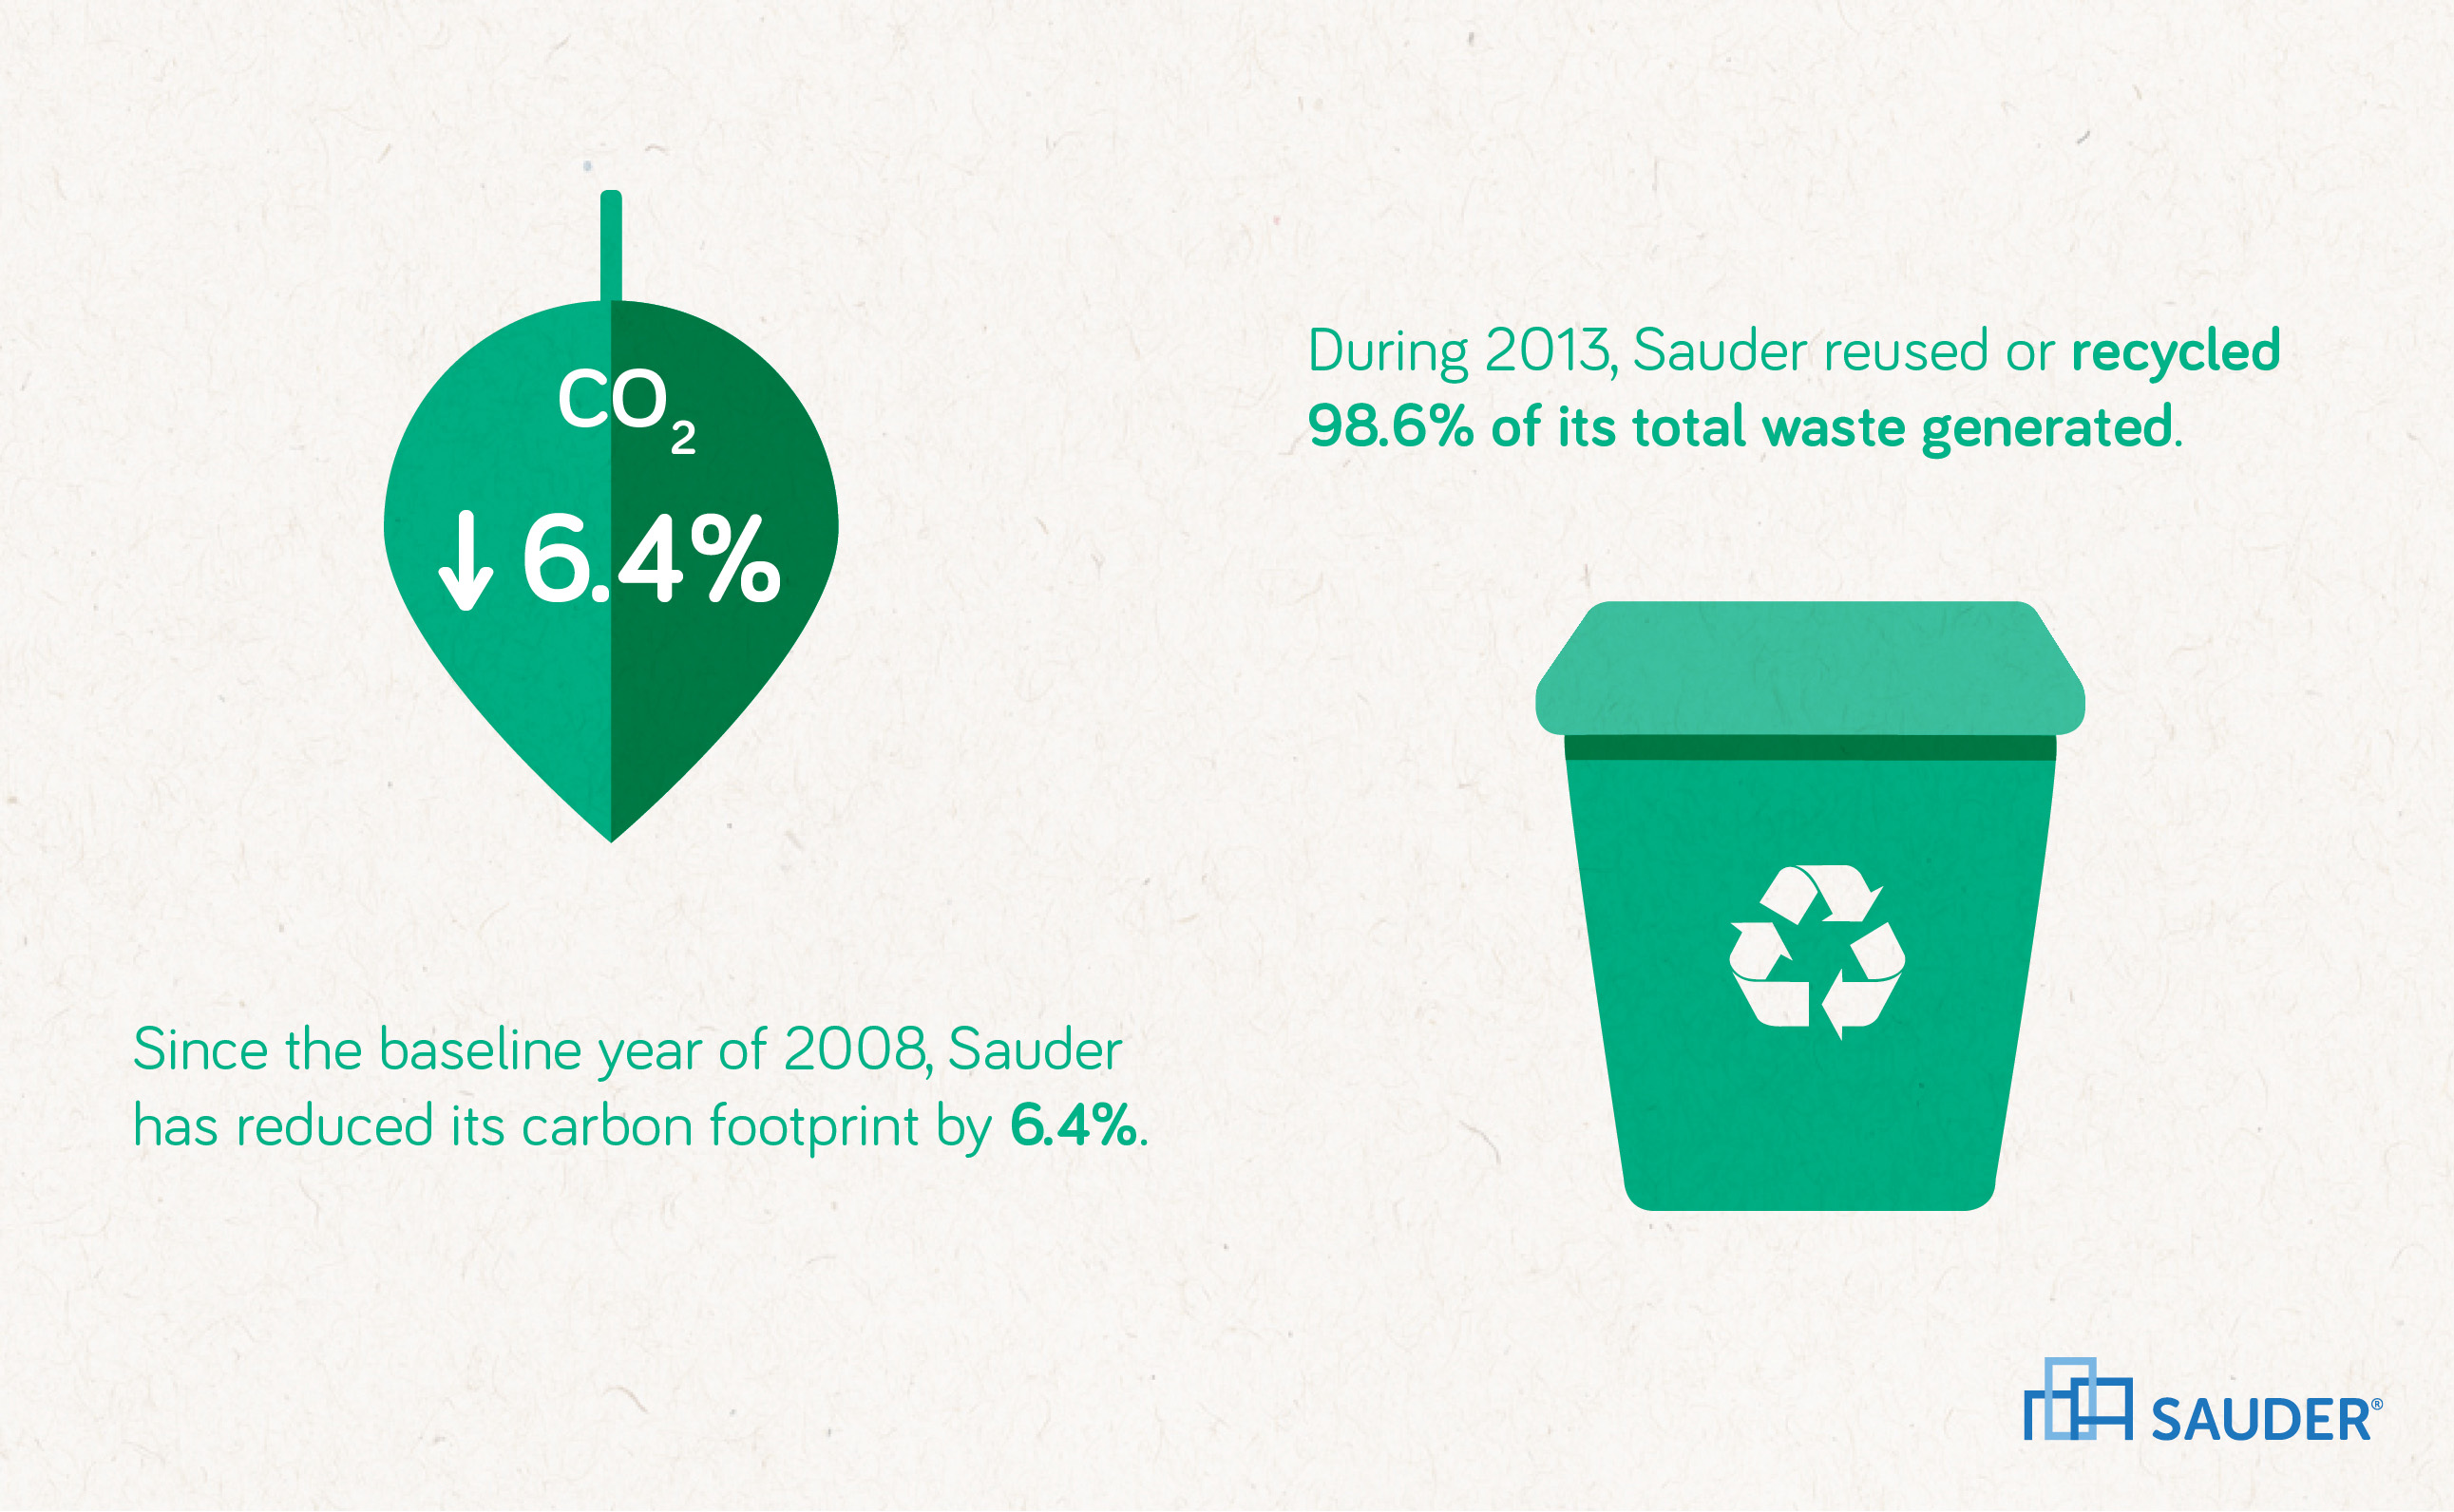 Sauder makes process changes to reduce its carbon footprint and recycle waste.